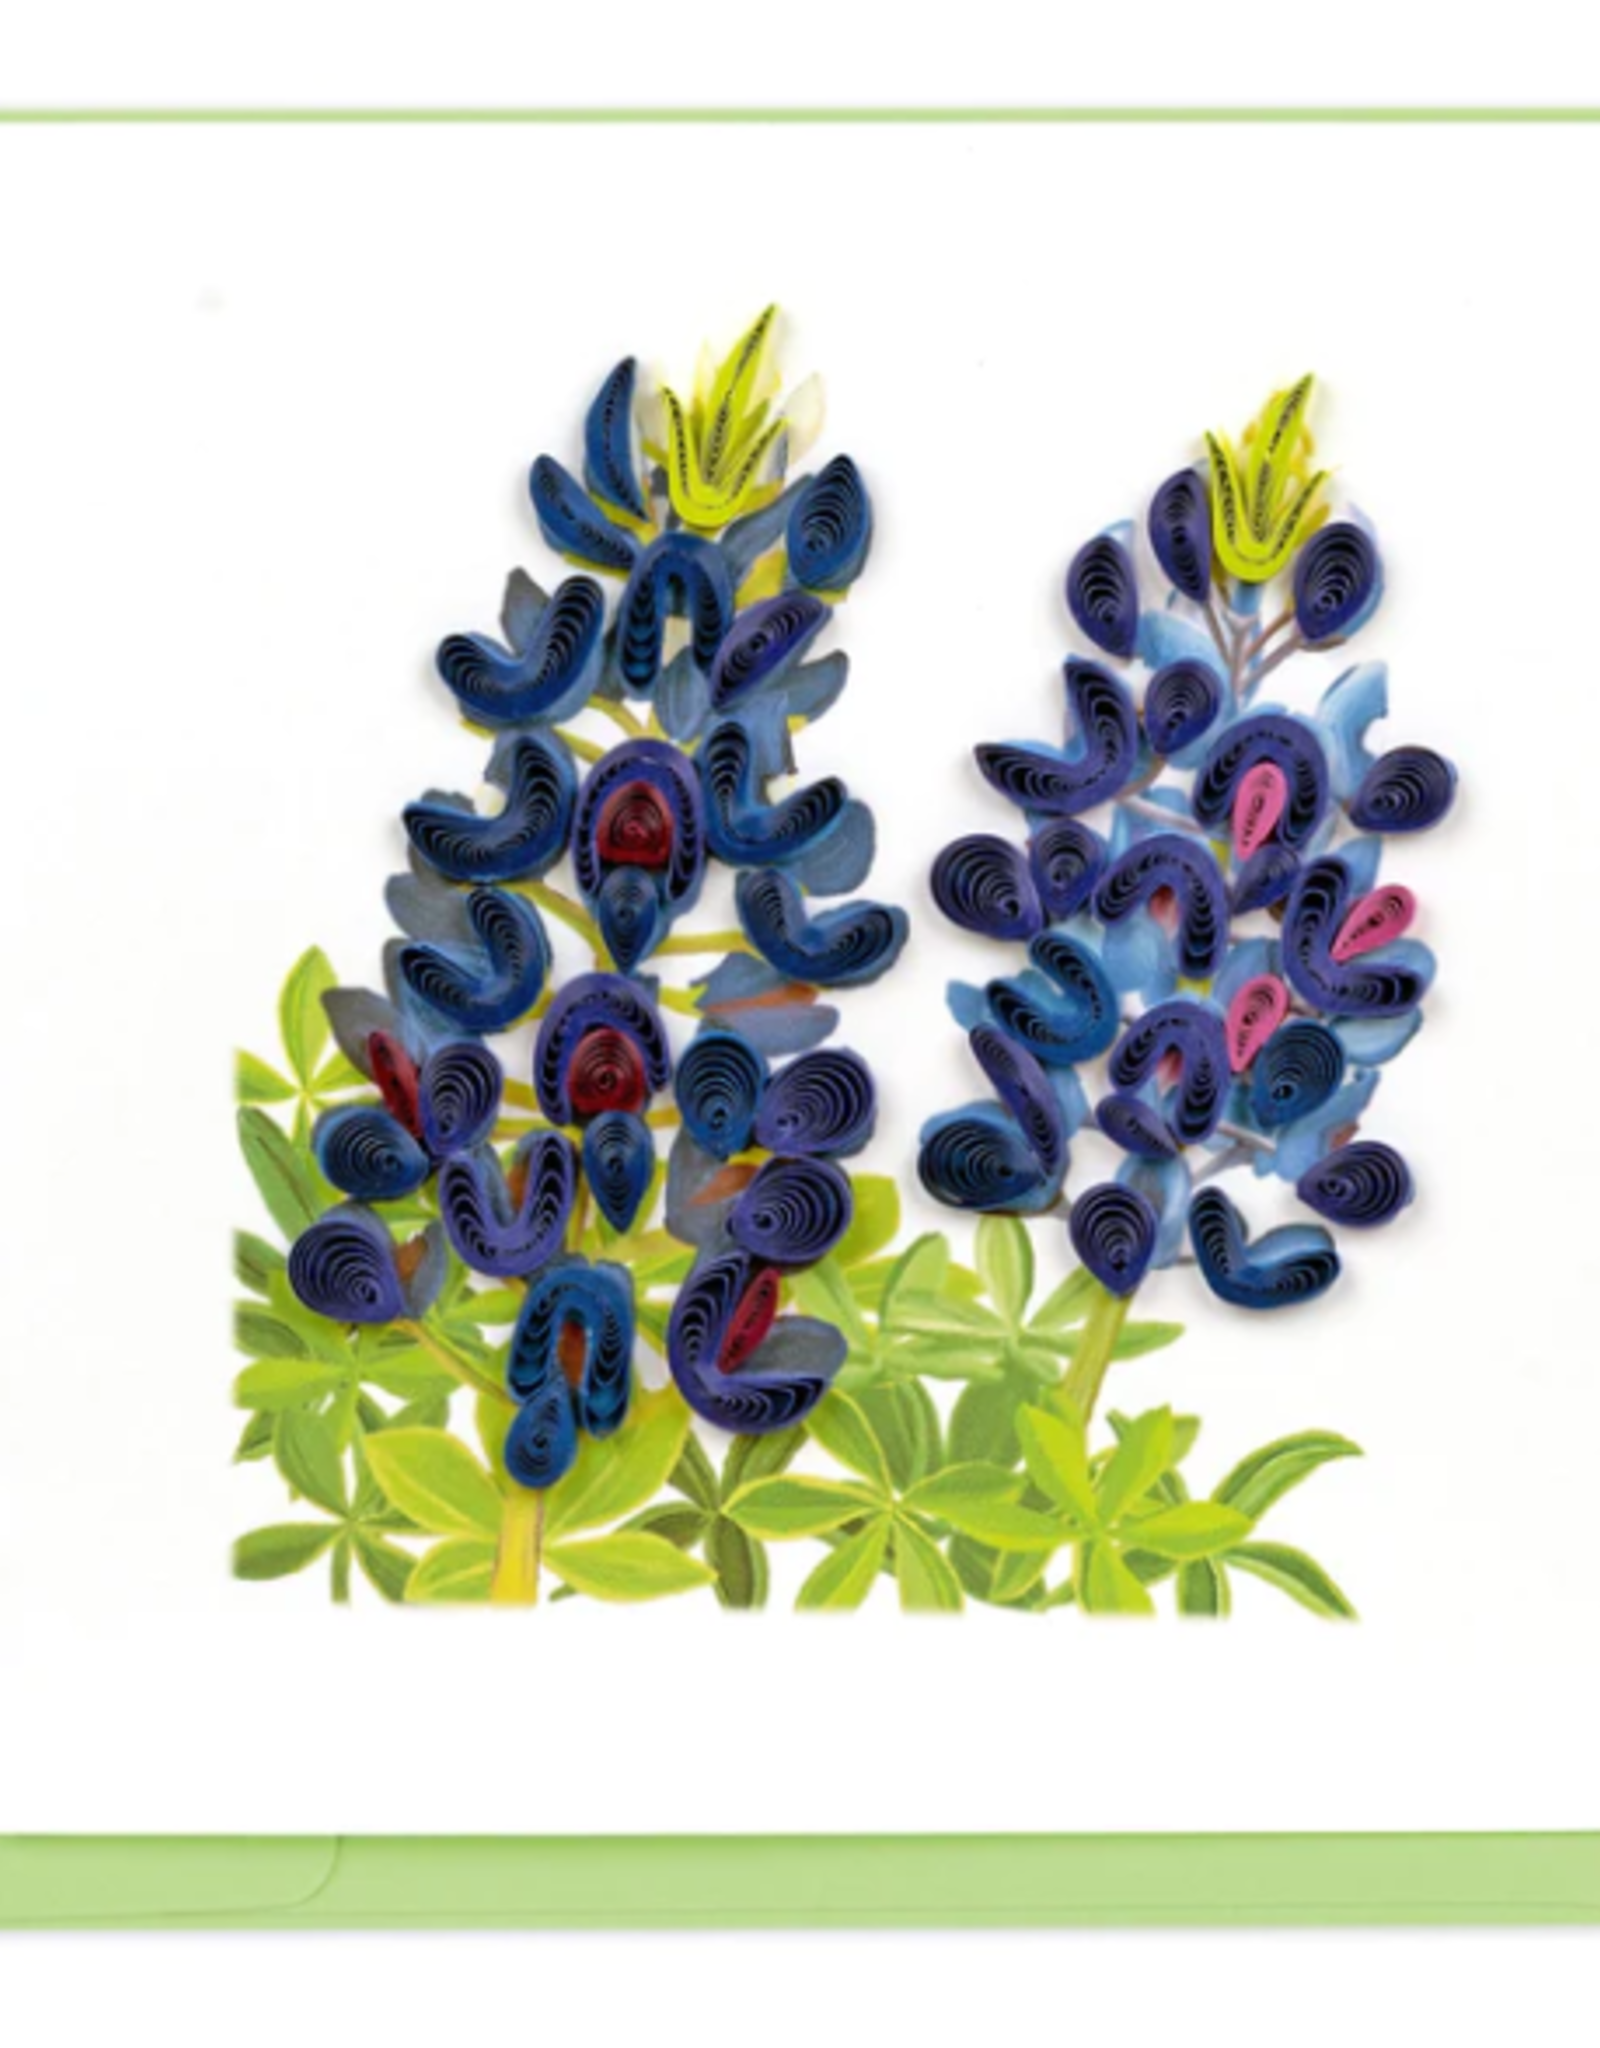 Quilling Card Quilled Bluebonnet Duo Greeting Card